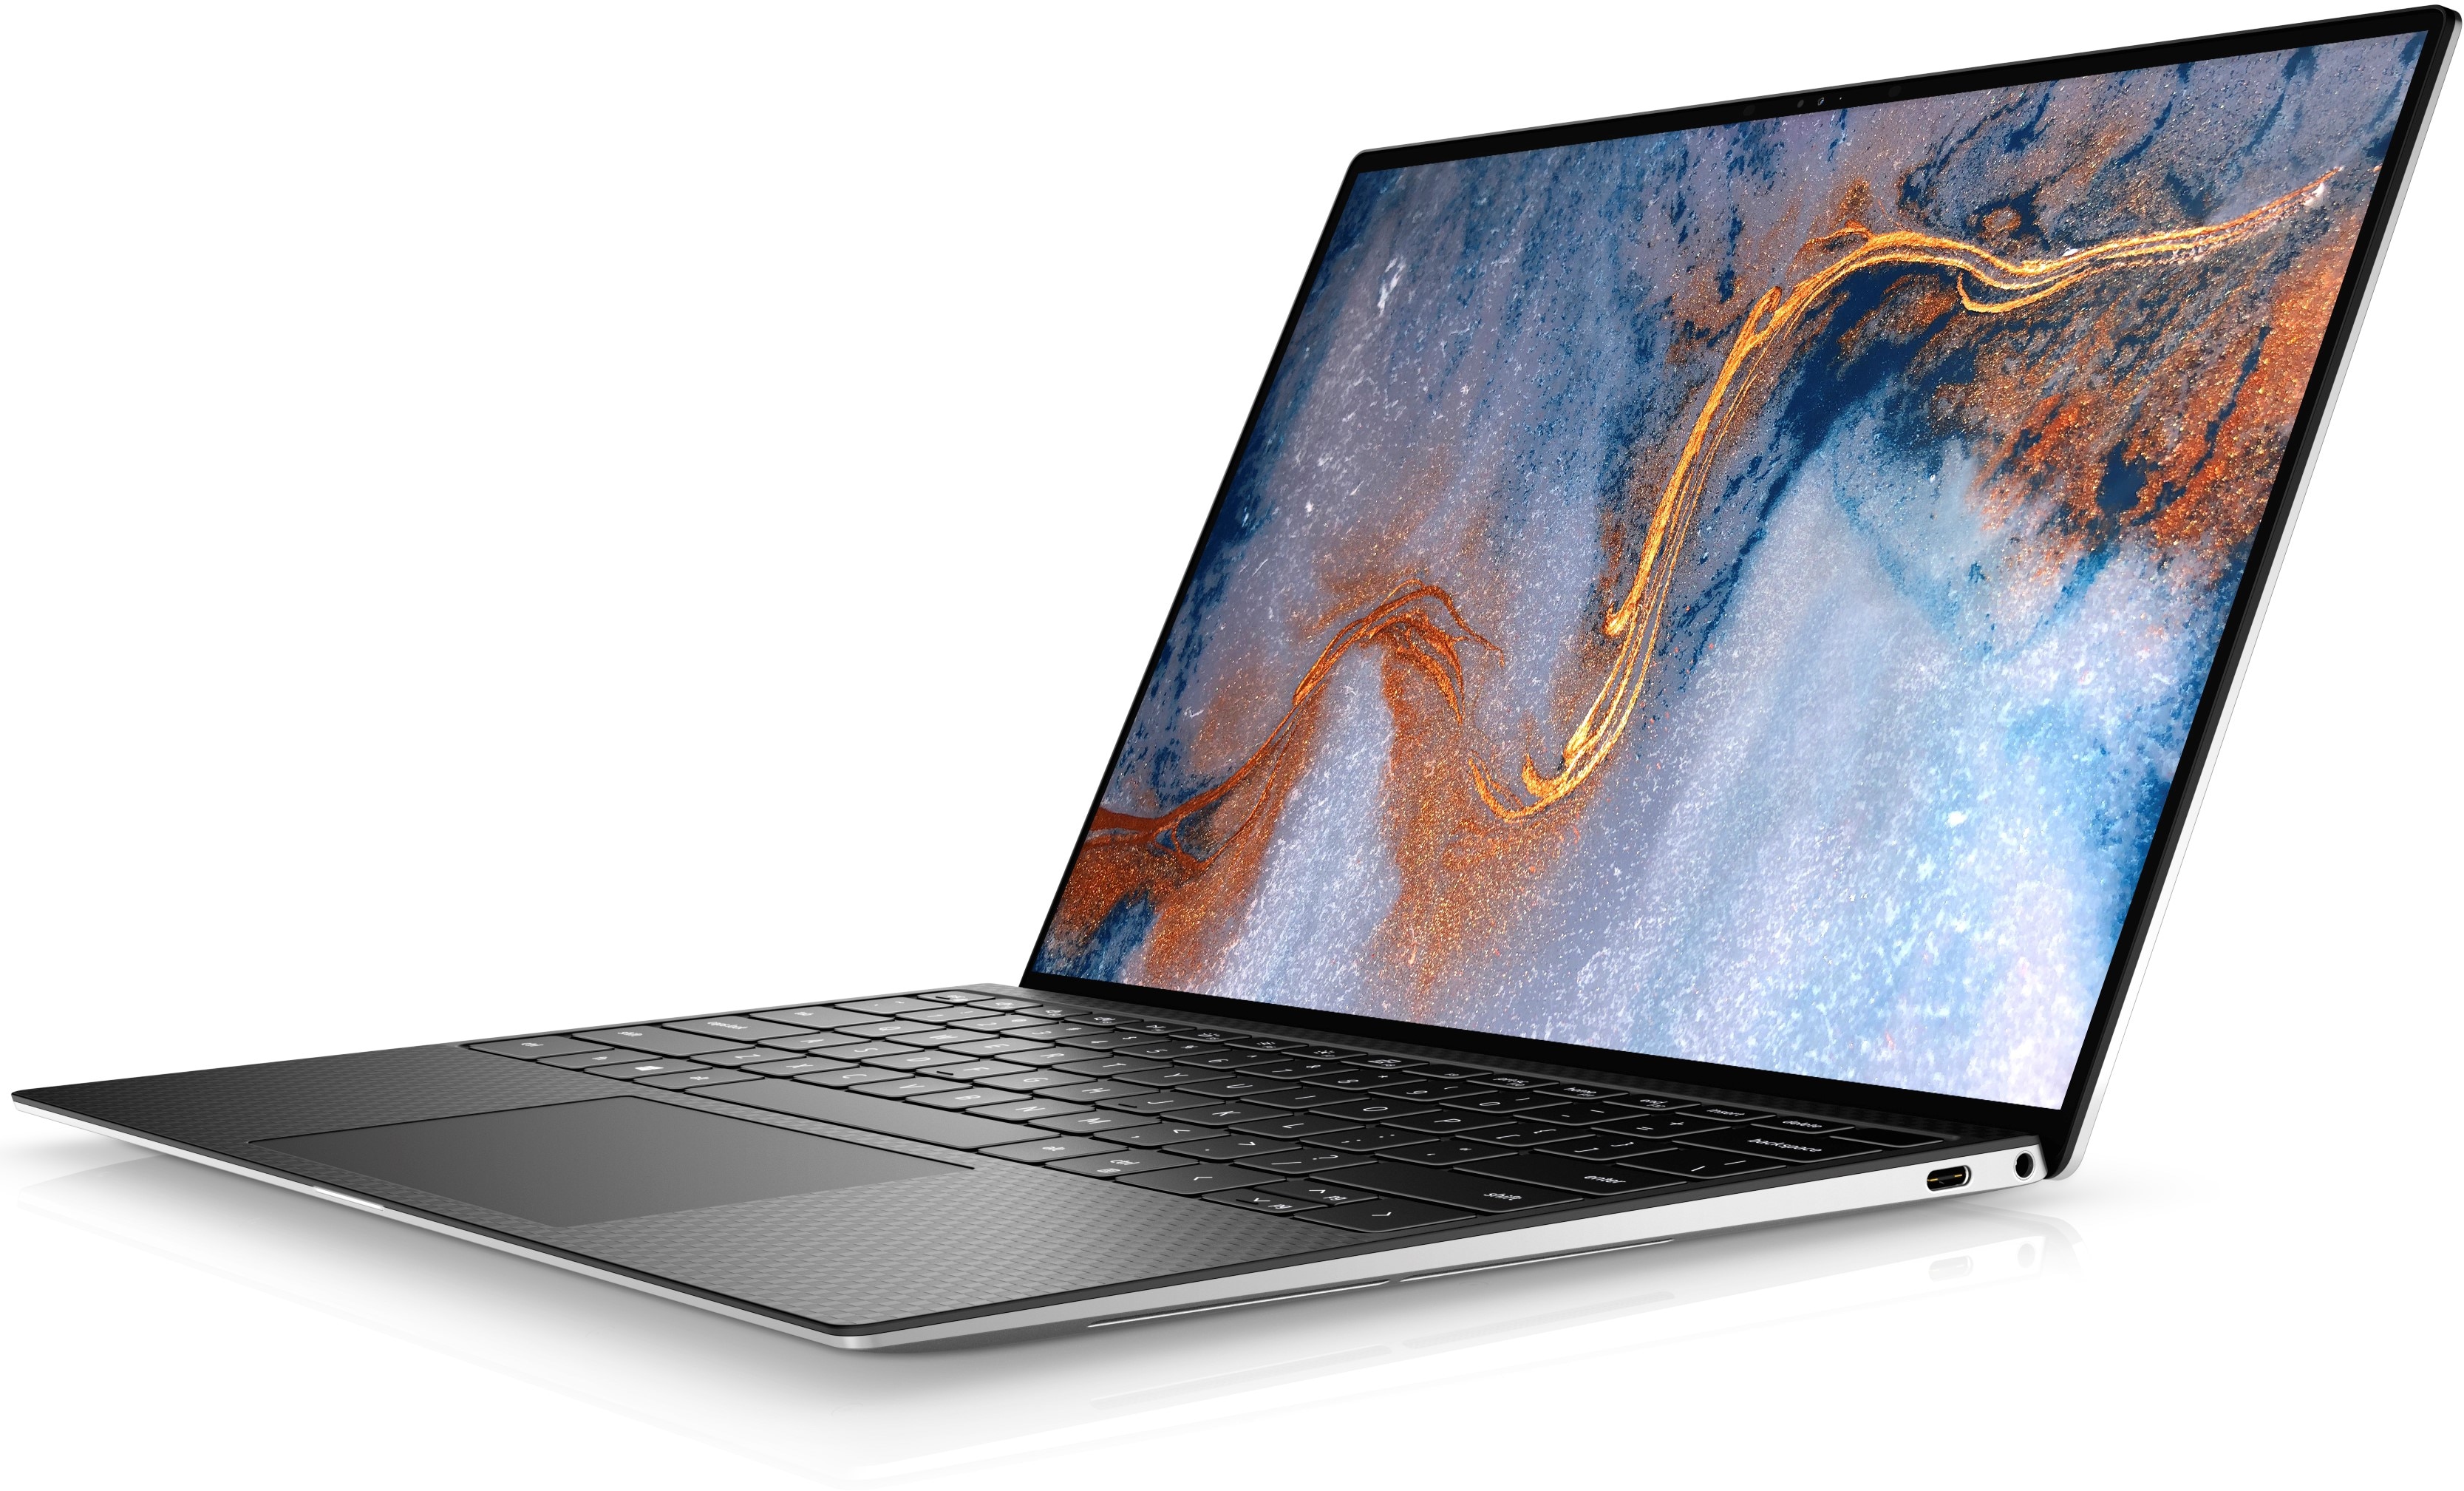 Dell XPS 13 Laptop | Dell USA